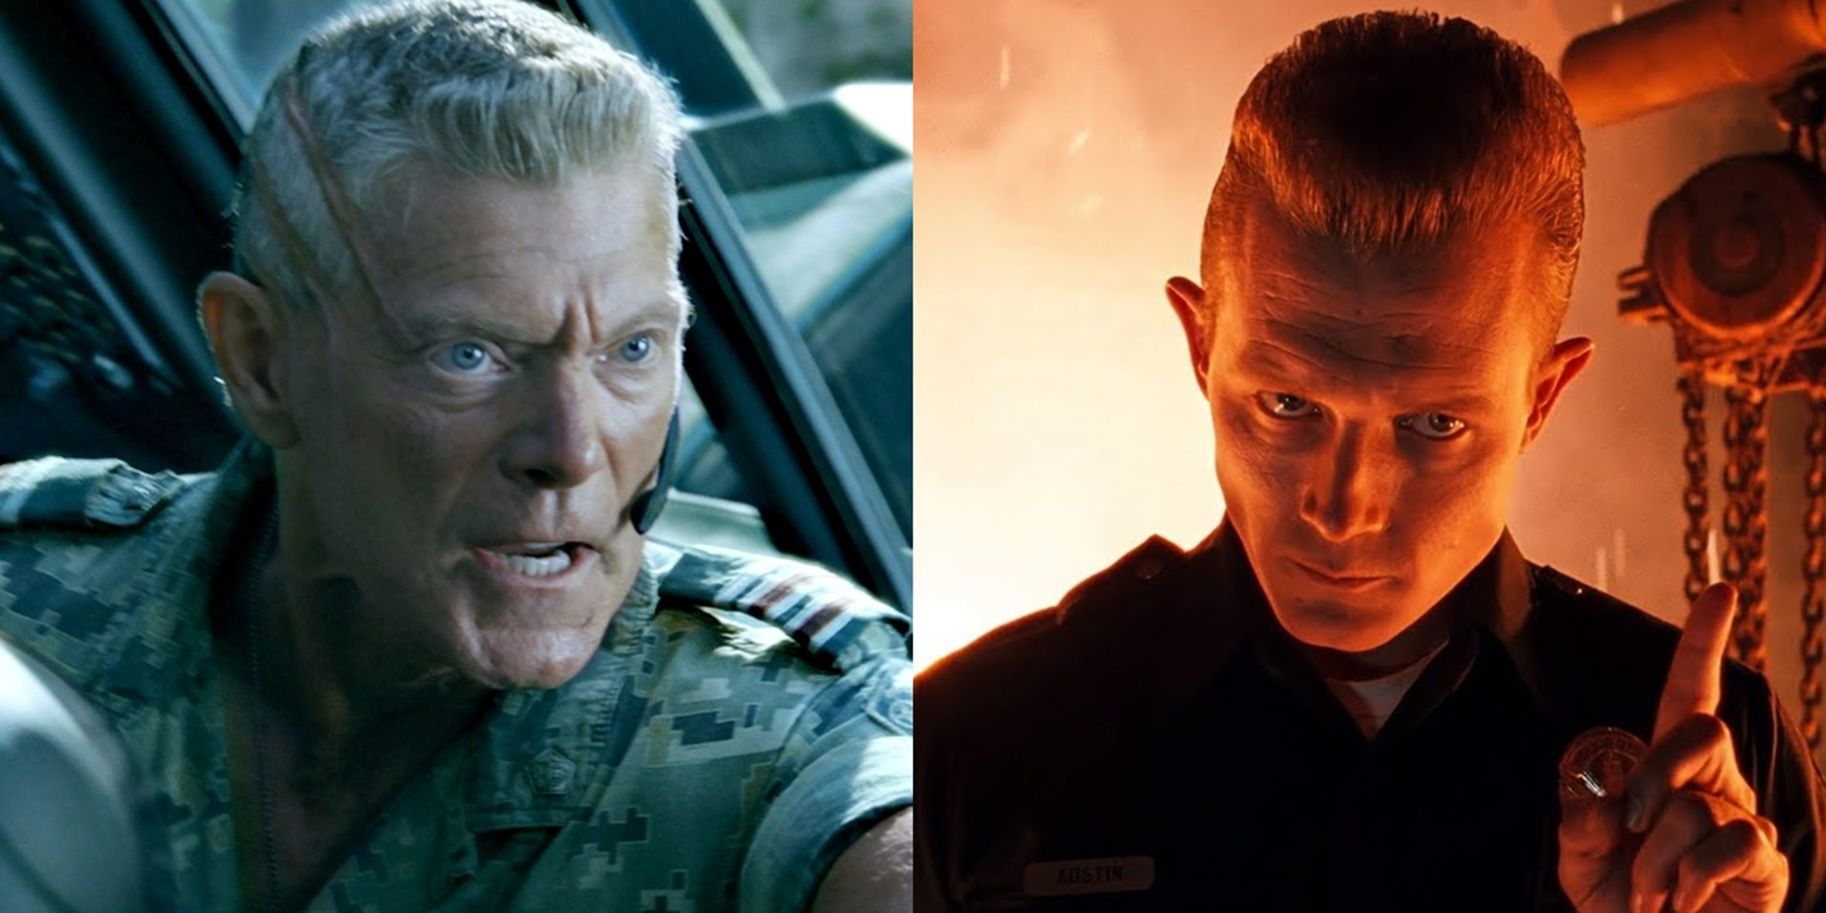 Split_image_of_Quaritch_in_Avatar_and_the_T-1000_in_Terminator_2